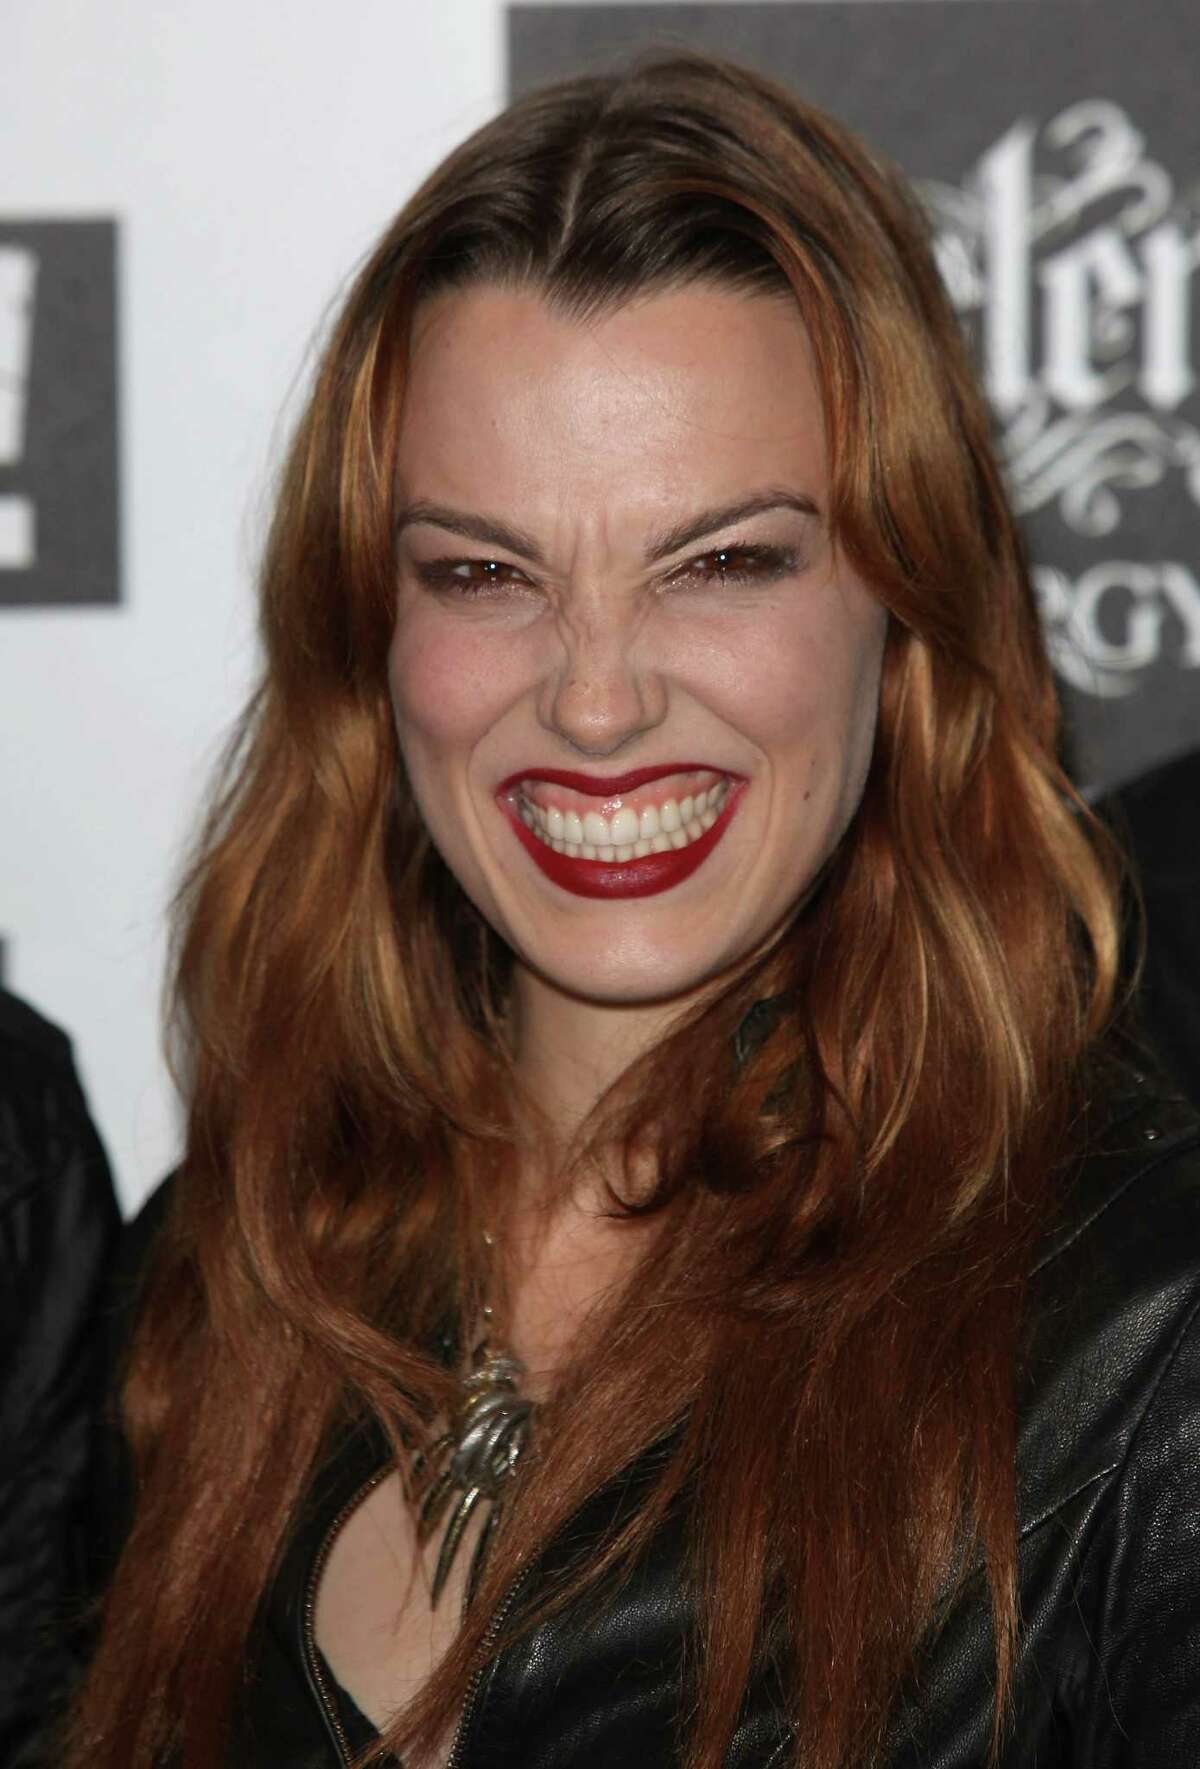 Lzzy Hale of Halestorm attends the Kerrang! Awards at The Brewery on June 7, 2012 in London, England.